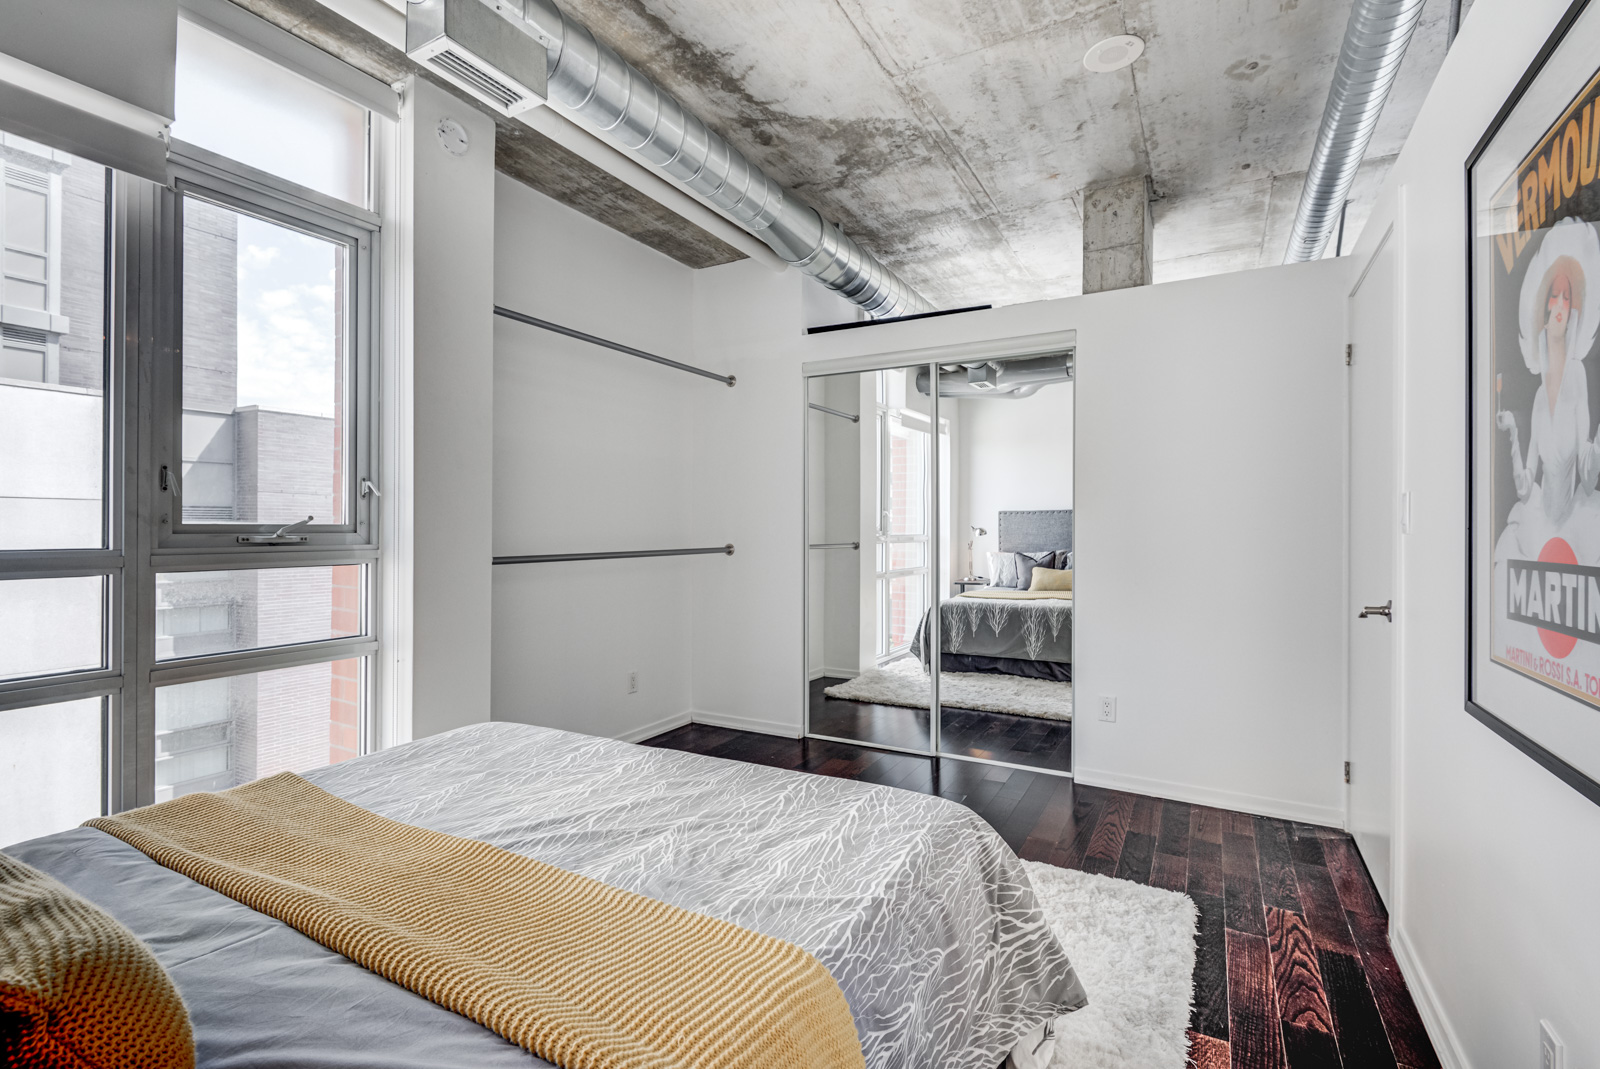 Soft loft master bedroom with exposed ductwork, concrete ceiling and low gray walls.